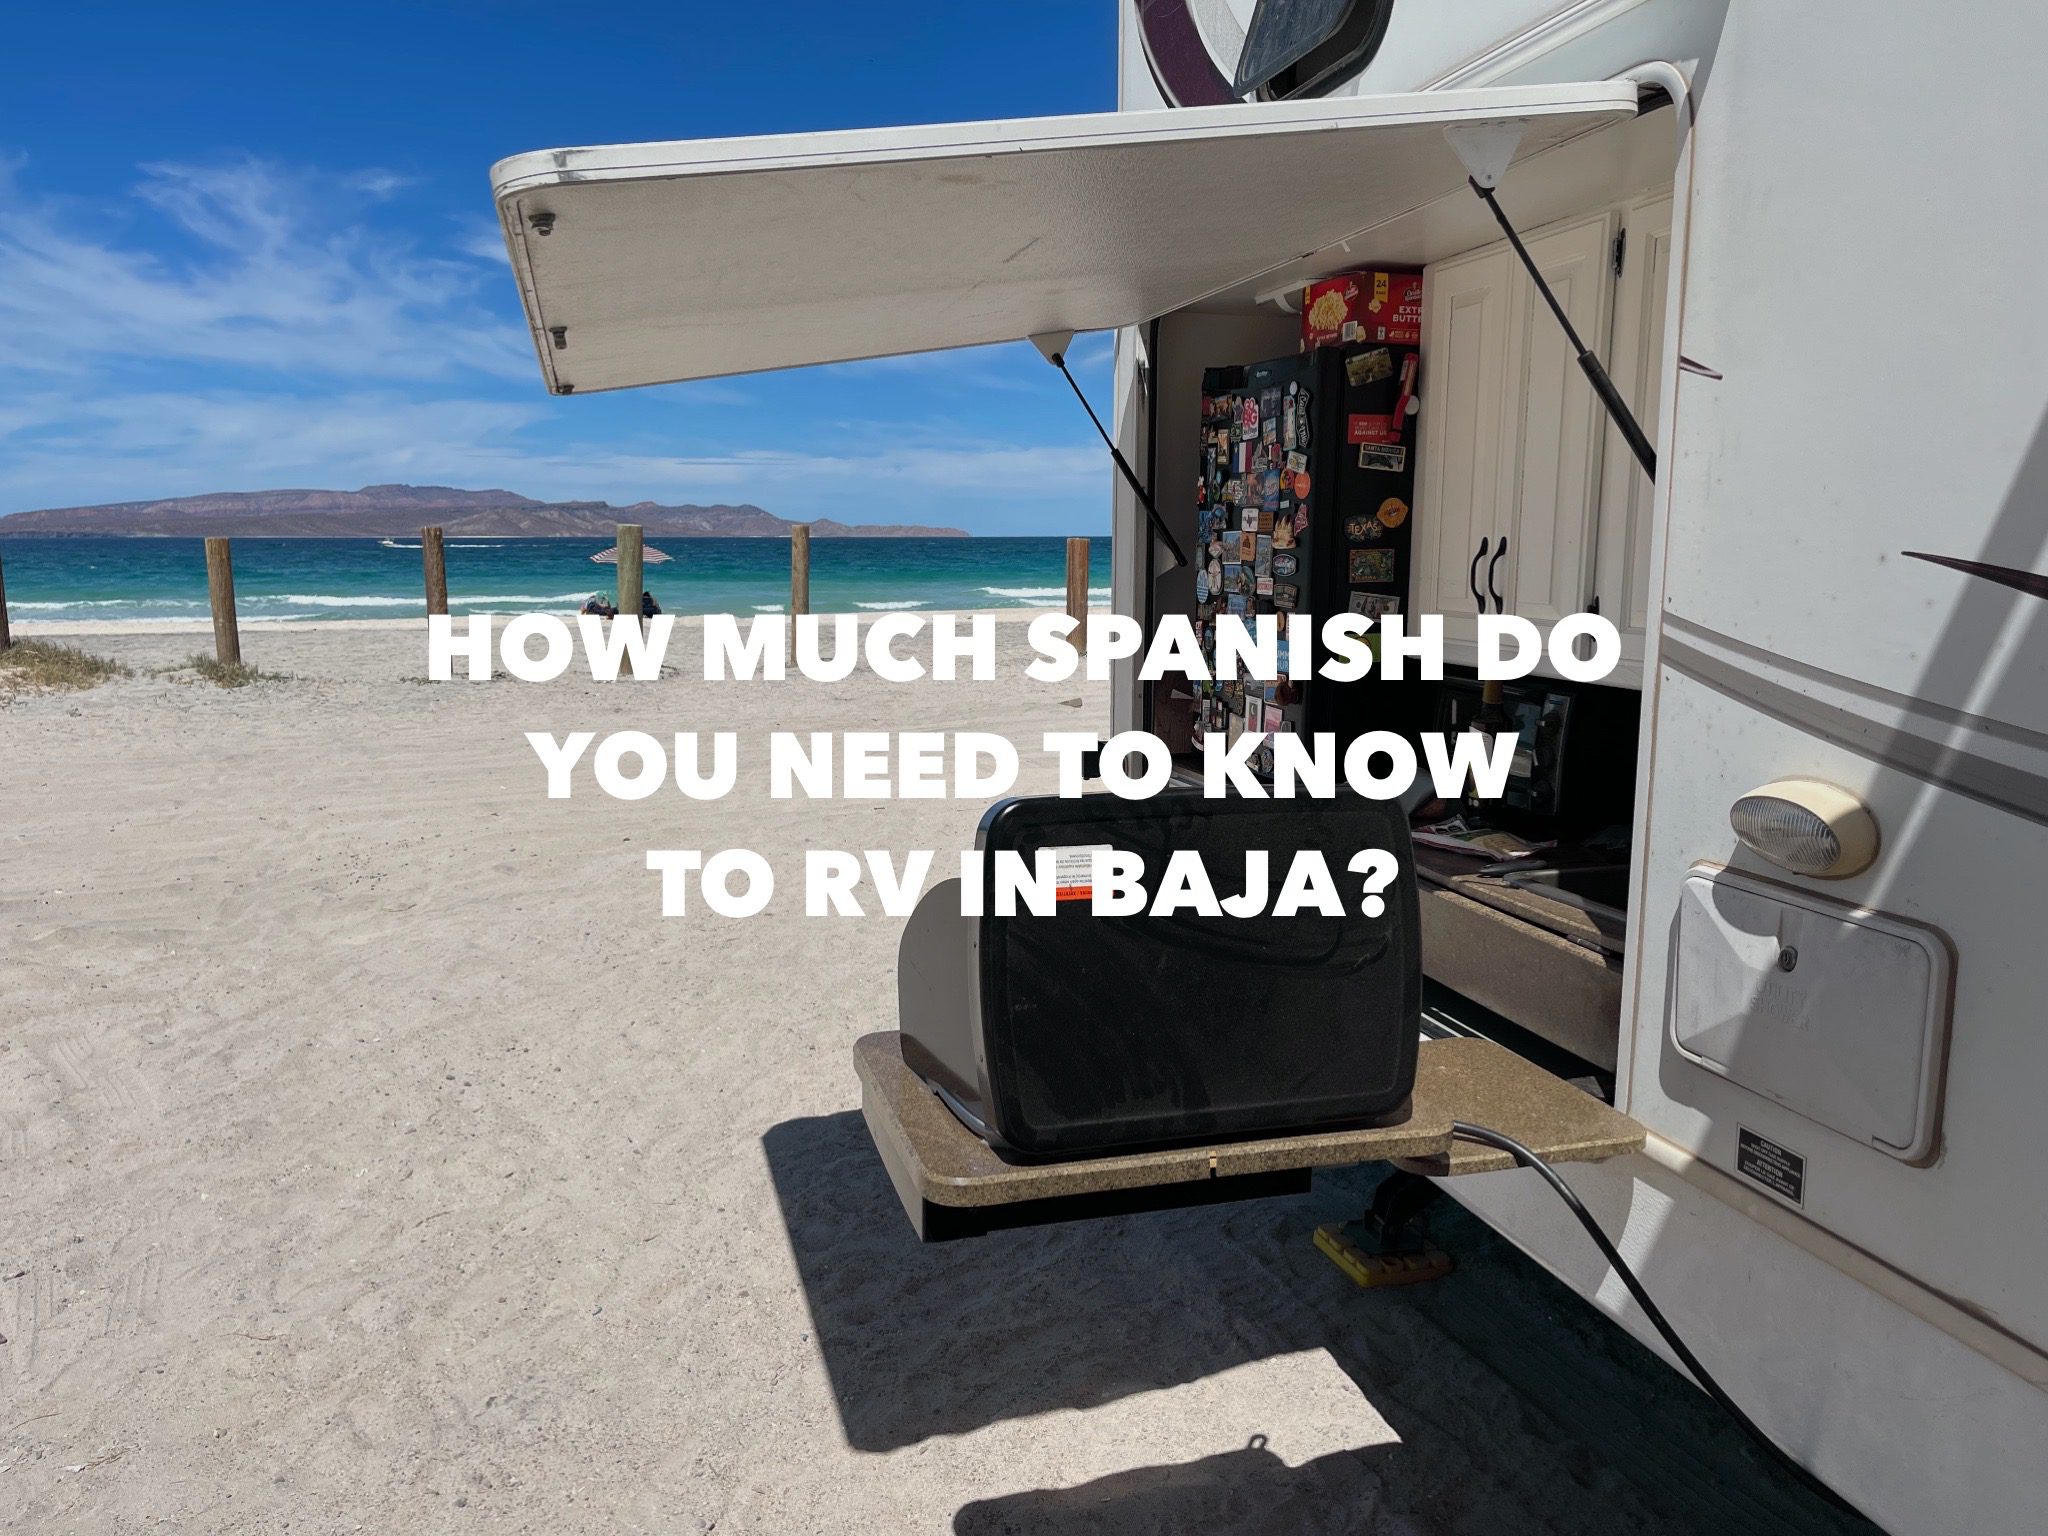 What It's Like To Drive Across the Baja Mexico Border in an RV